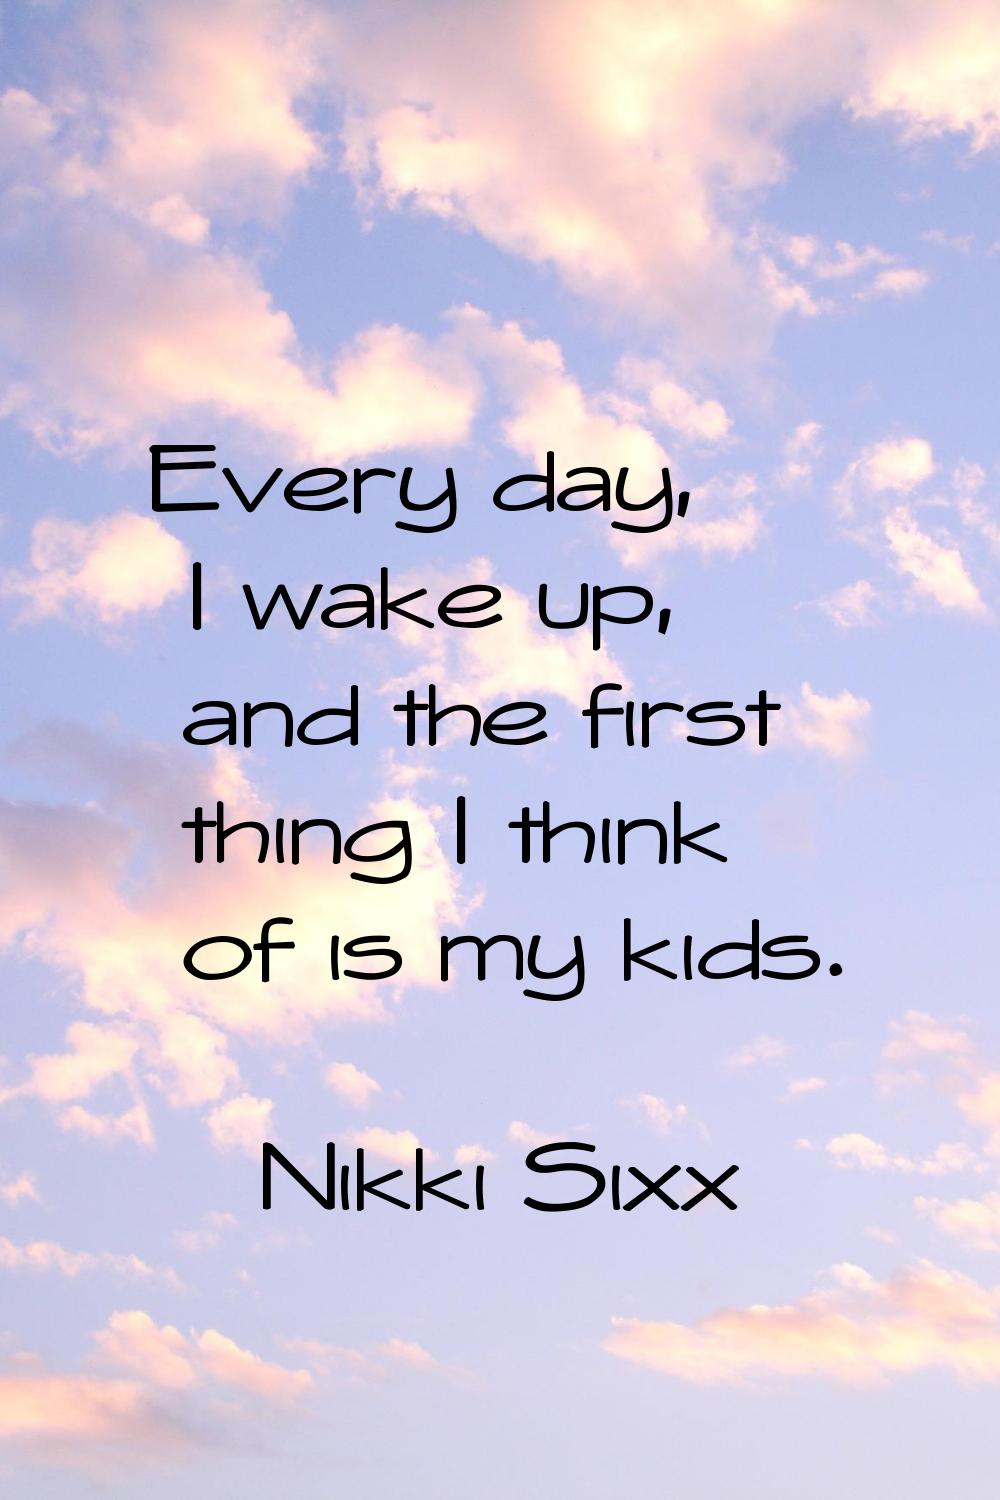 Every day, I wake up, and the first thing I think of is my kids.